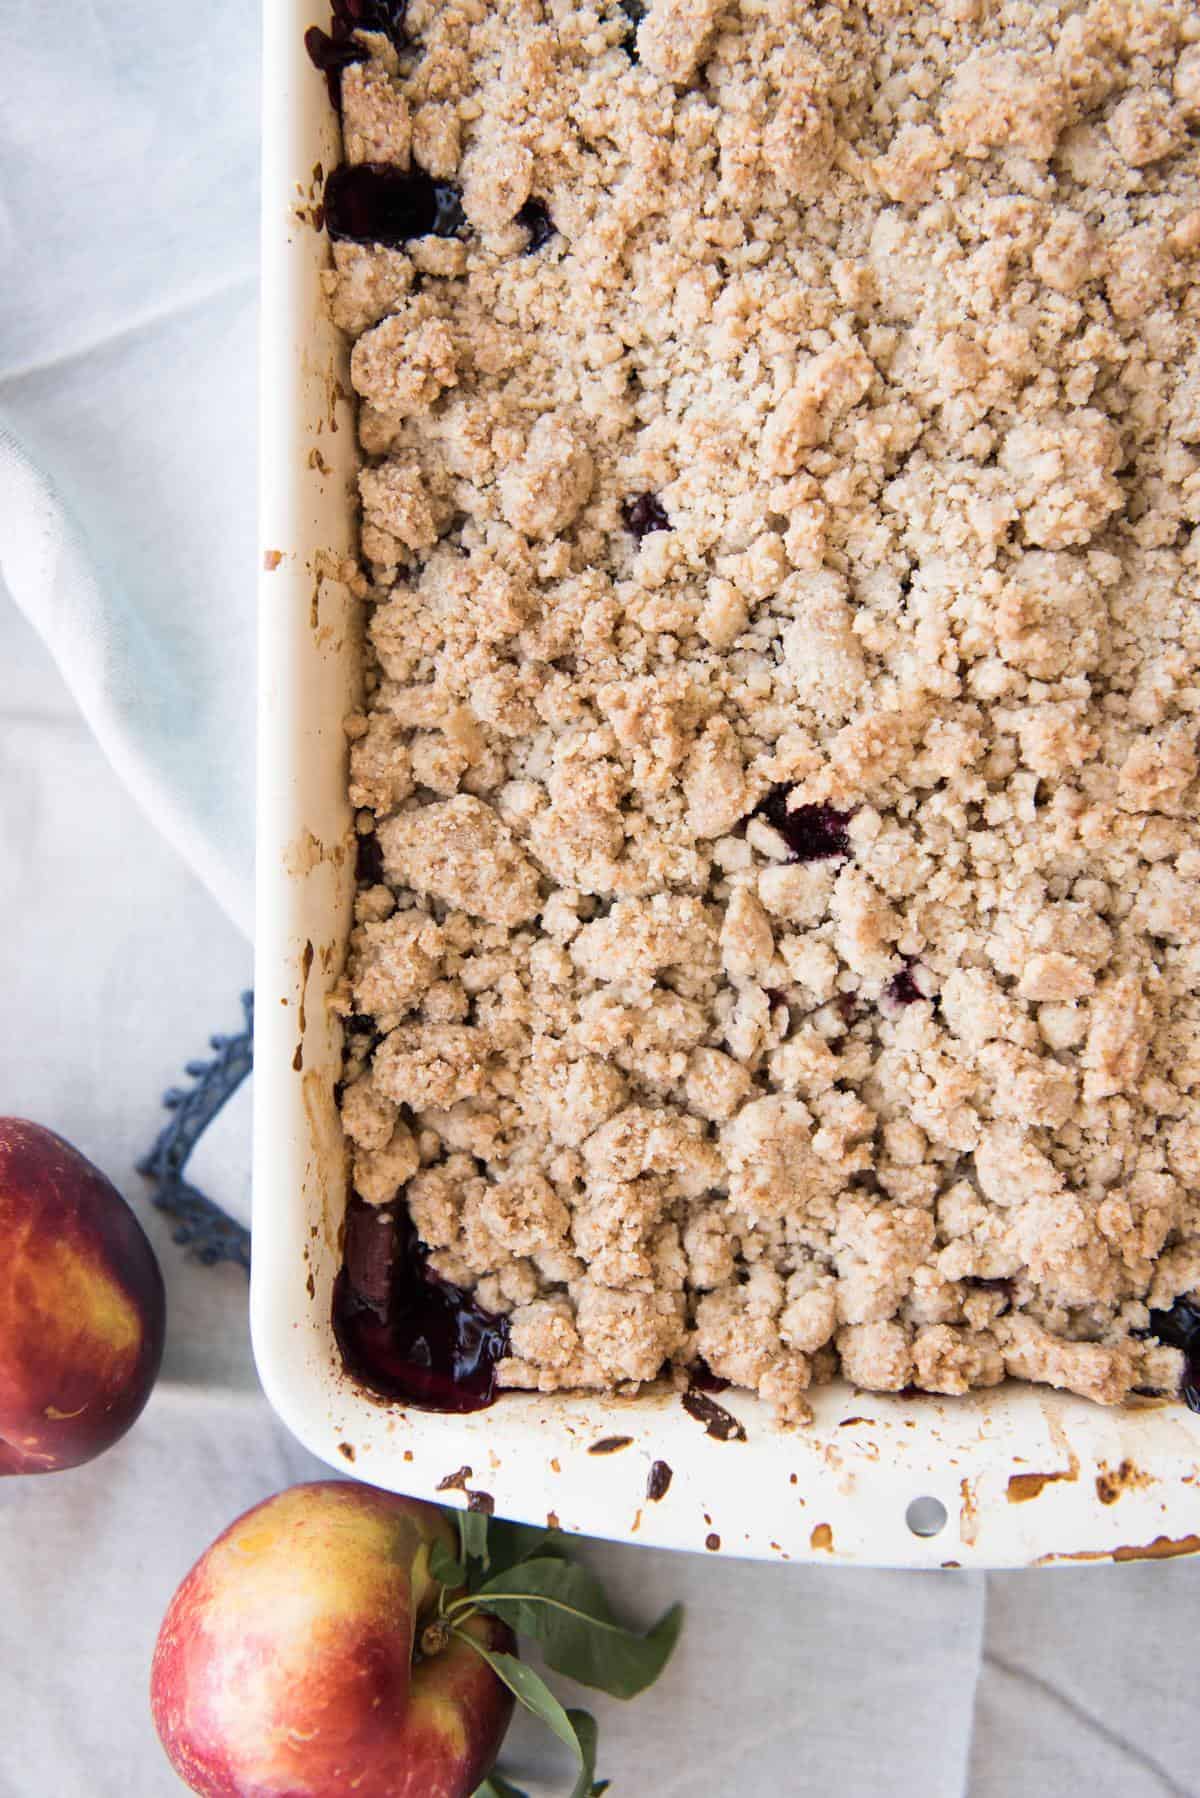 A blackberry nectarine crumble in a baking dish next to fresh nectarines.